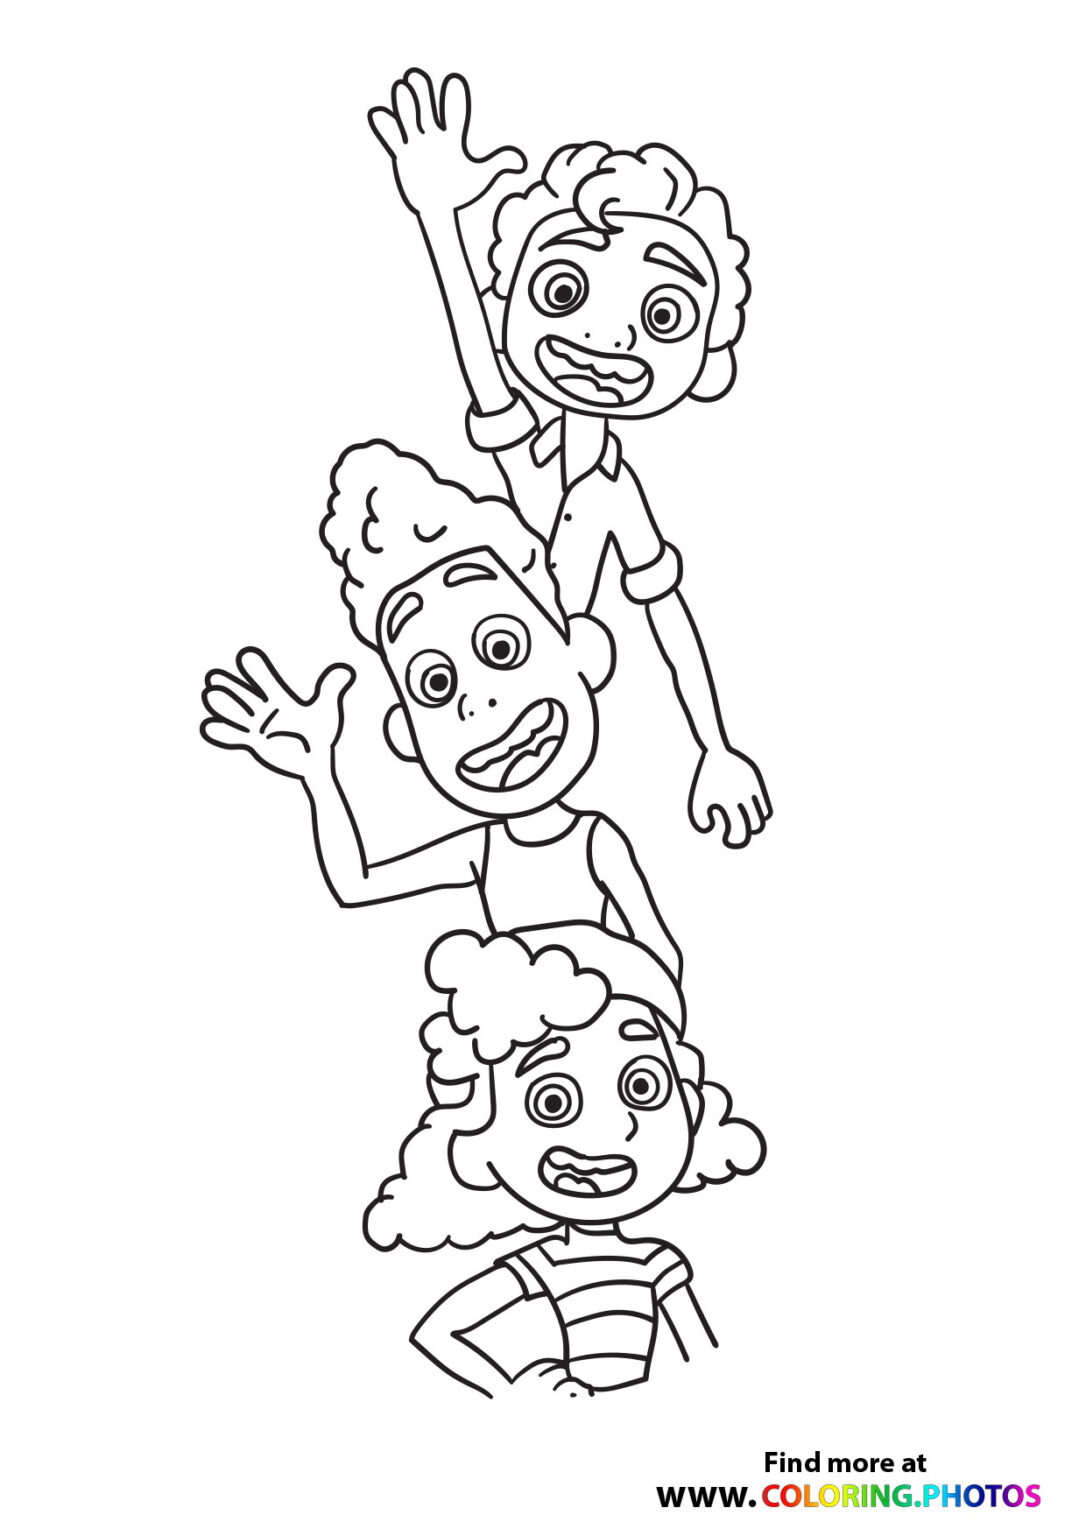 Disney Luca coloring pages   Coloring Pages for kids ...